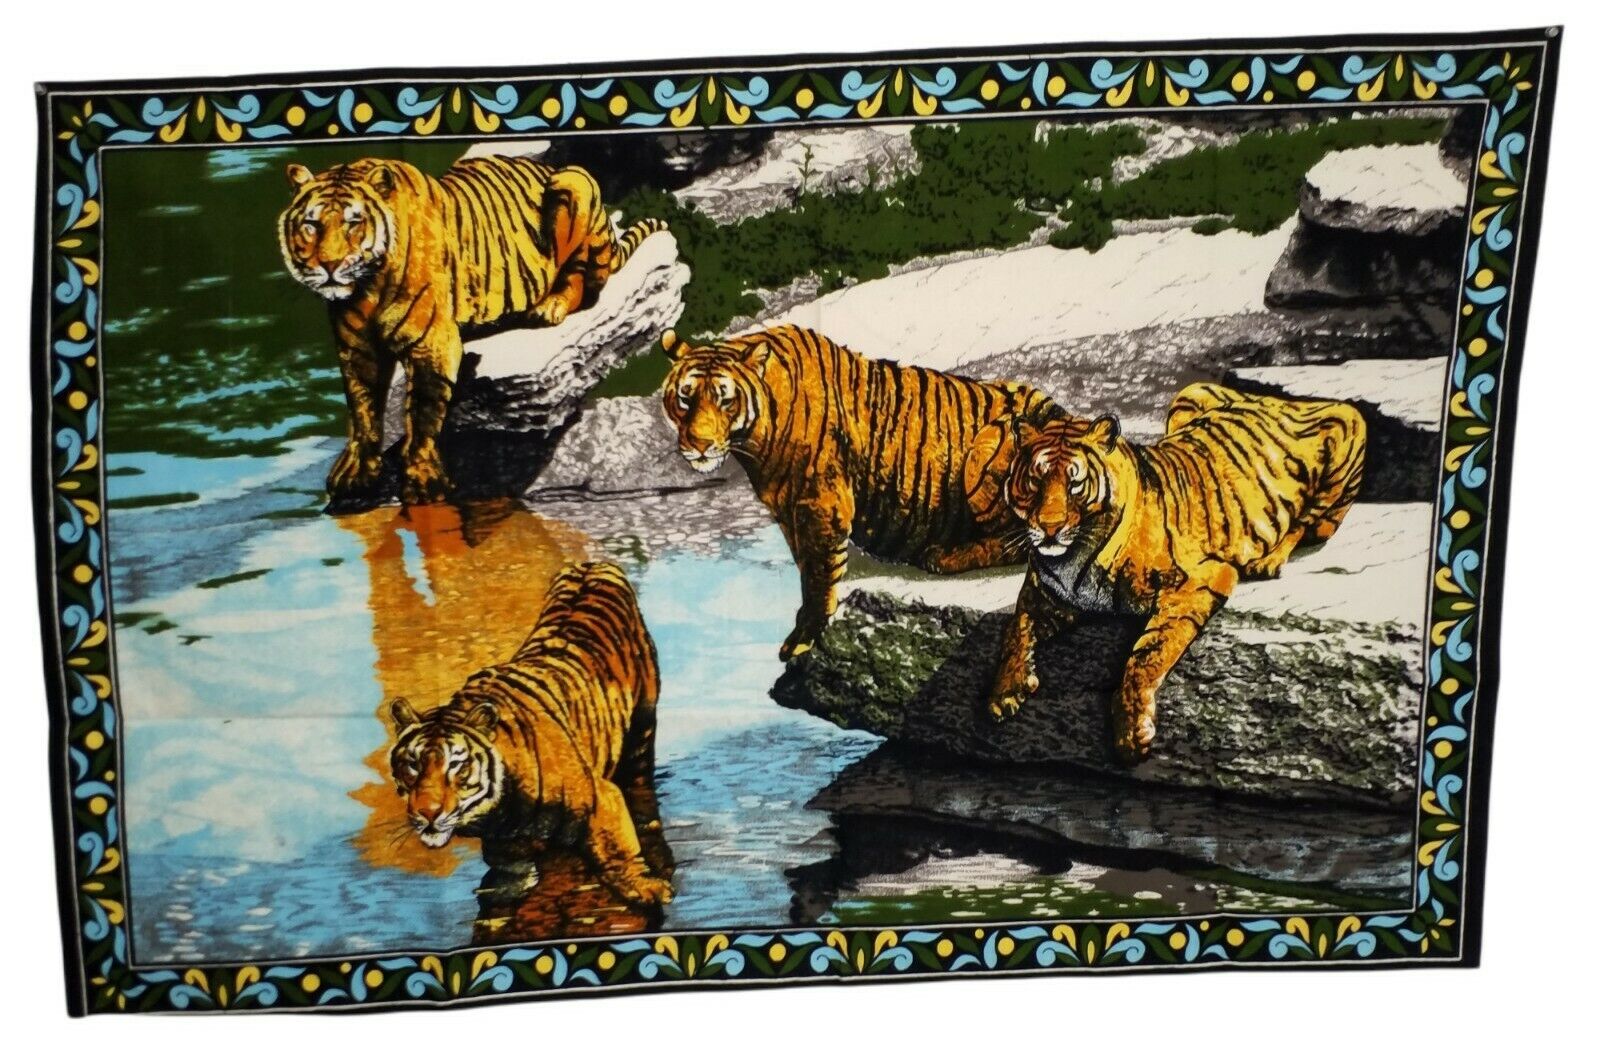 Vintage Bengal Tiger Velvet Tapestry Wall Hanging 100% Cotton Made in Turkey New